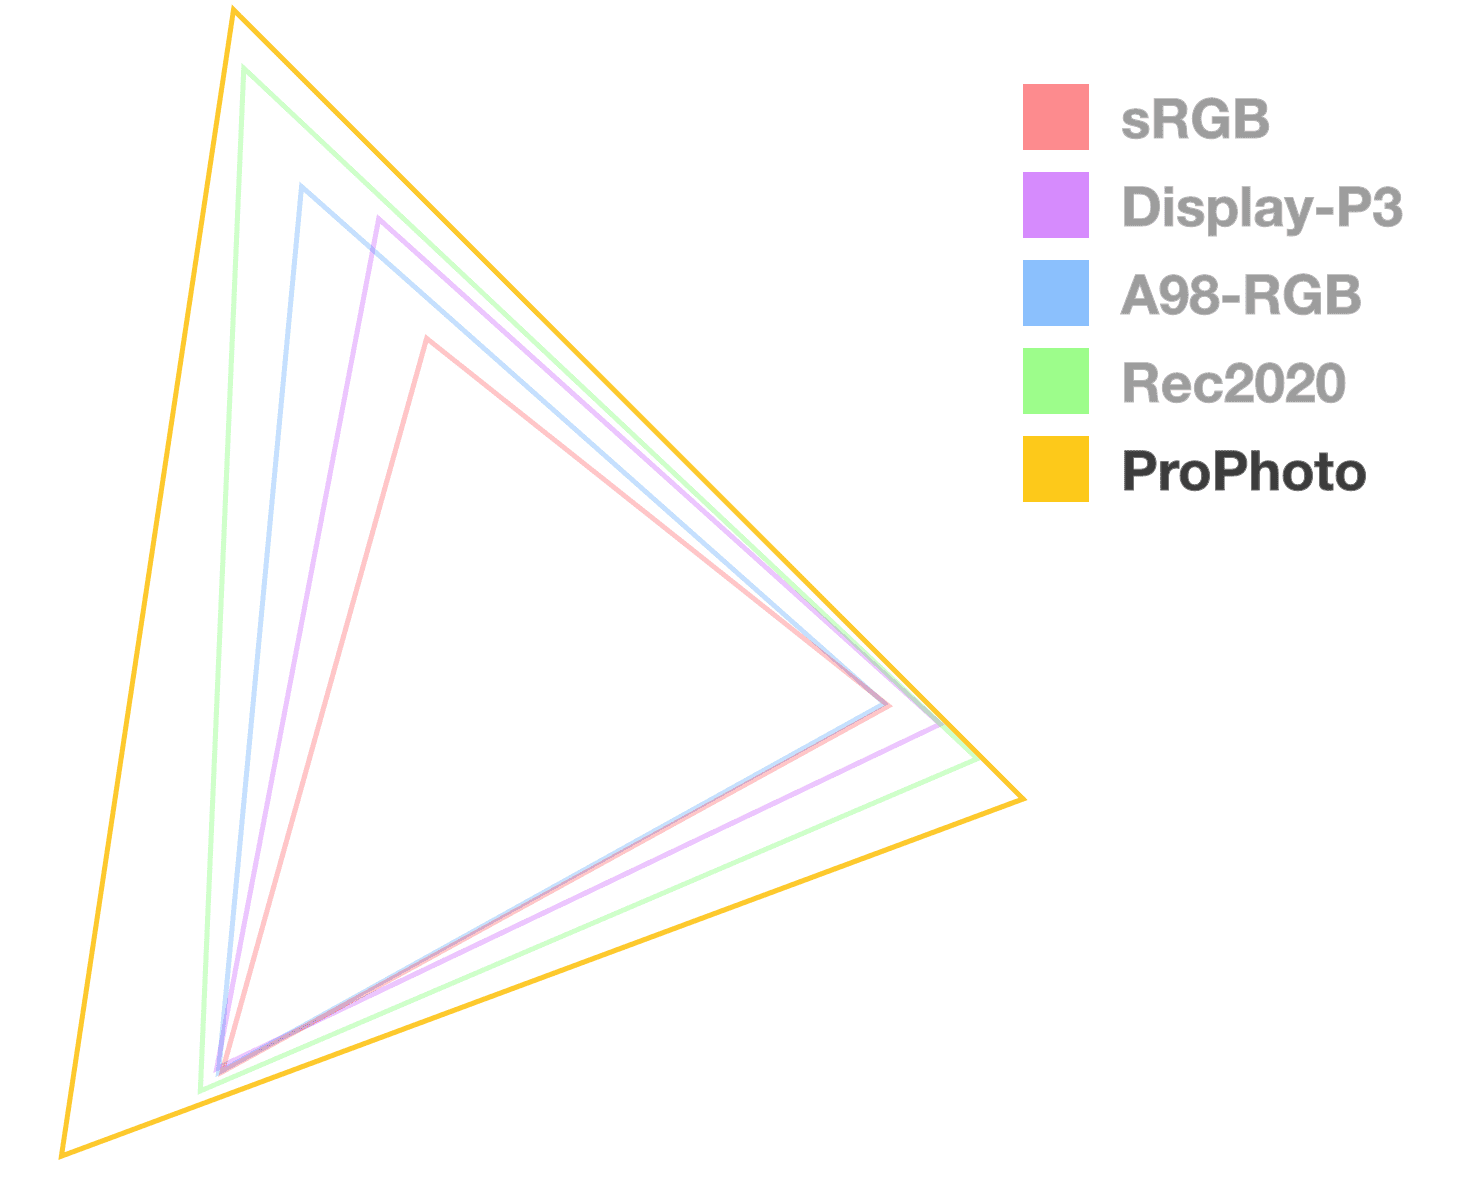 ProPhoto triangle is the only one fully opaque, to help
  visualize the size of the gamut. It looks like the largest.